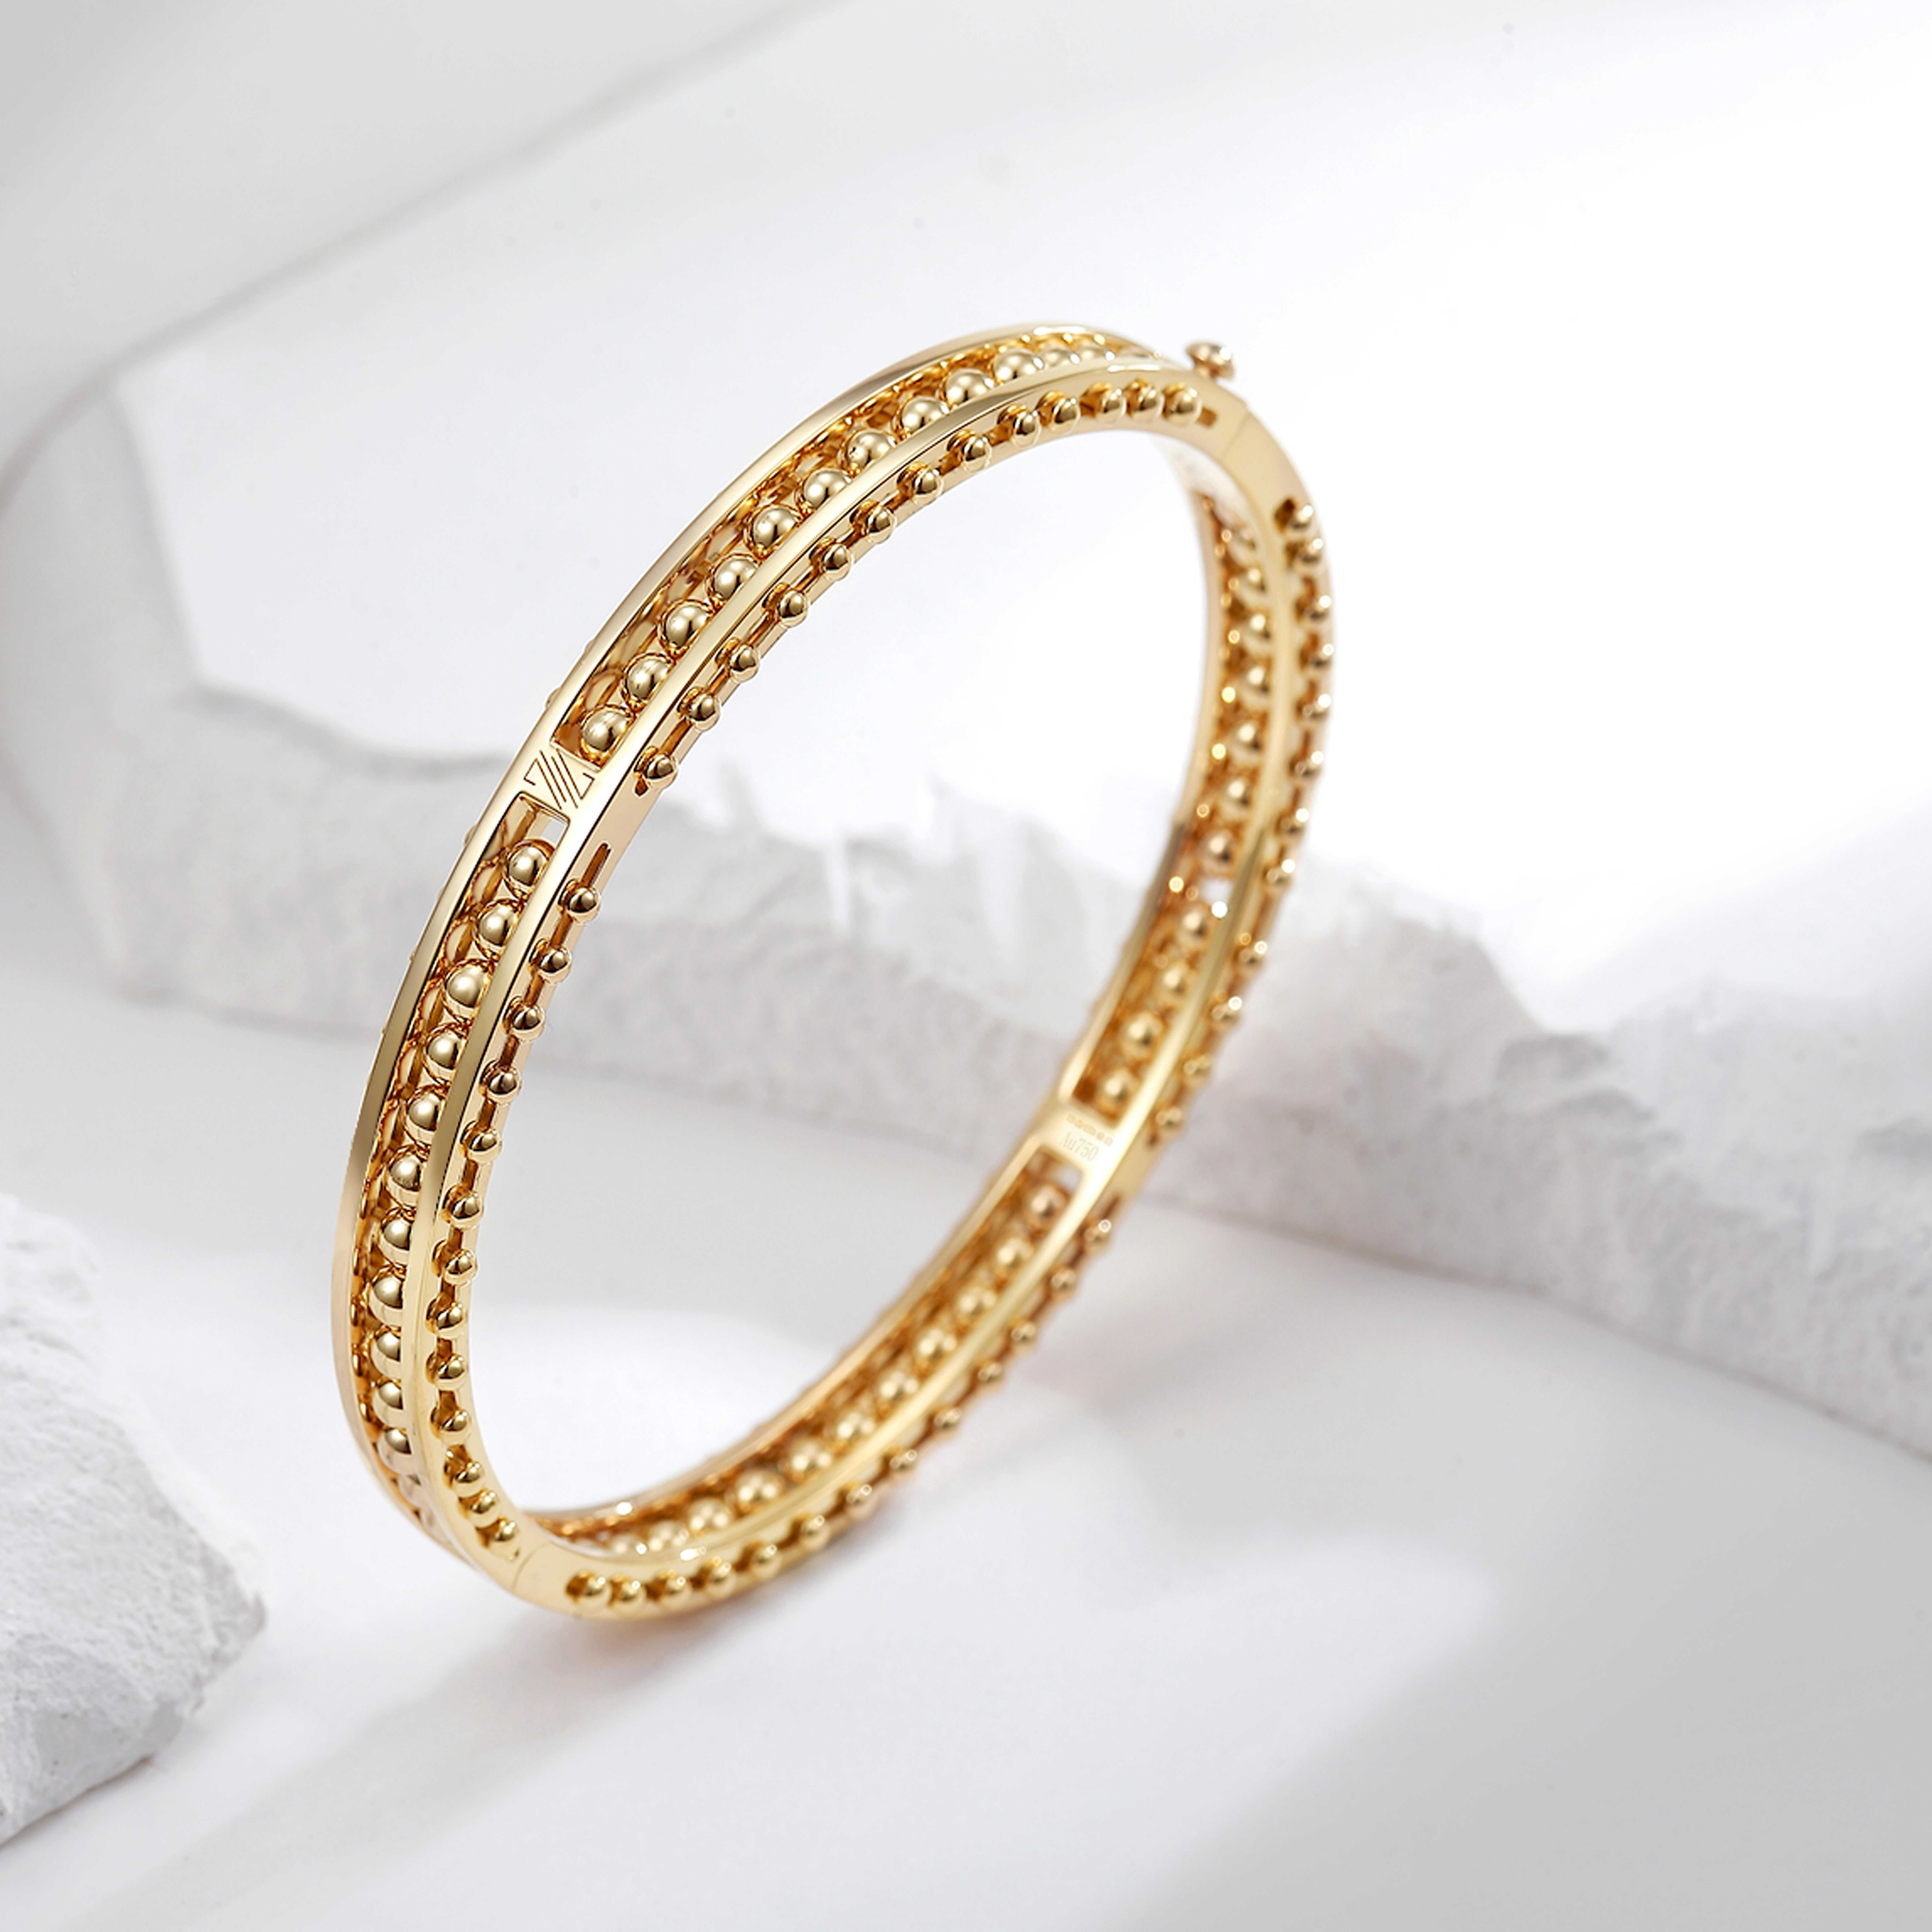 Details: 18 Karat Yellow Gold,  Gold Beads
Width: 6mm

This beautifully crafted bangle features hand crafted gold beads set in 18k yellow gold frame.

The Impressionists – is a joyful celebration of the beauty of light dancing over vibrant, natural